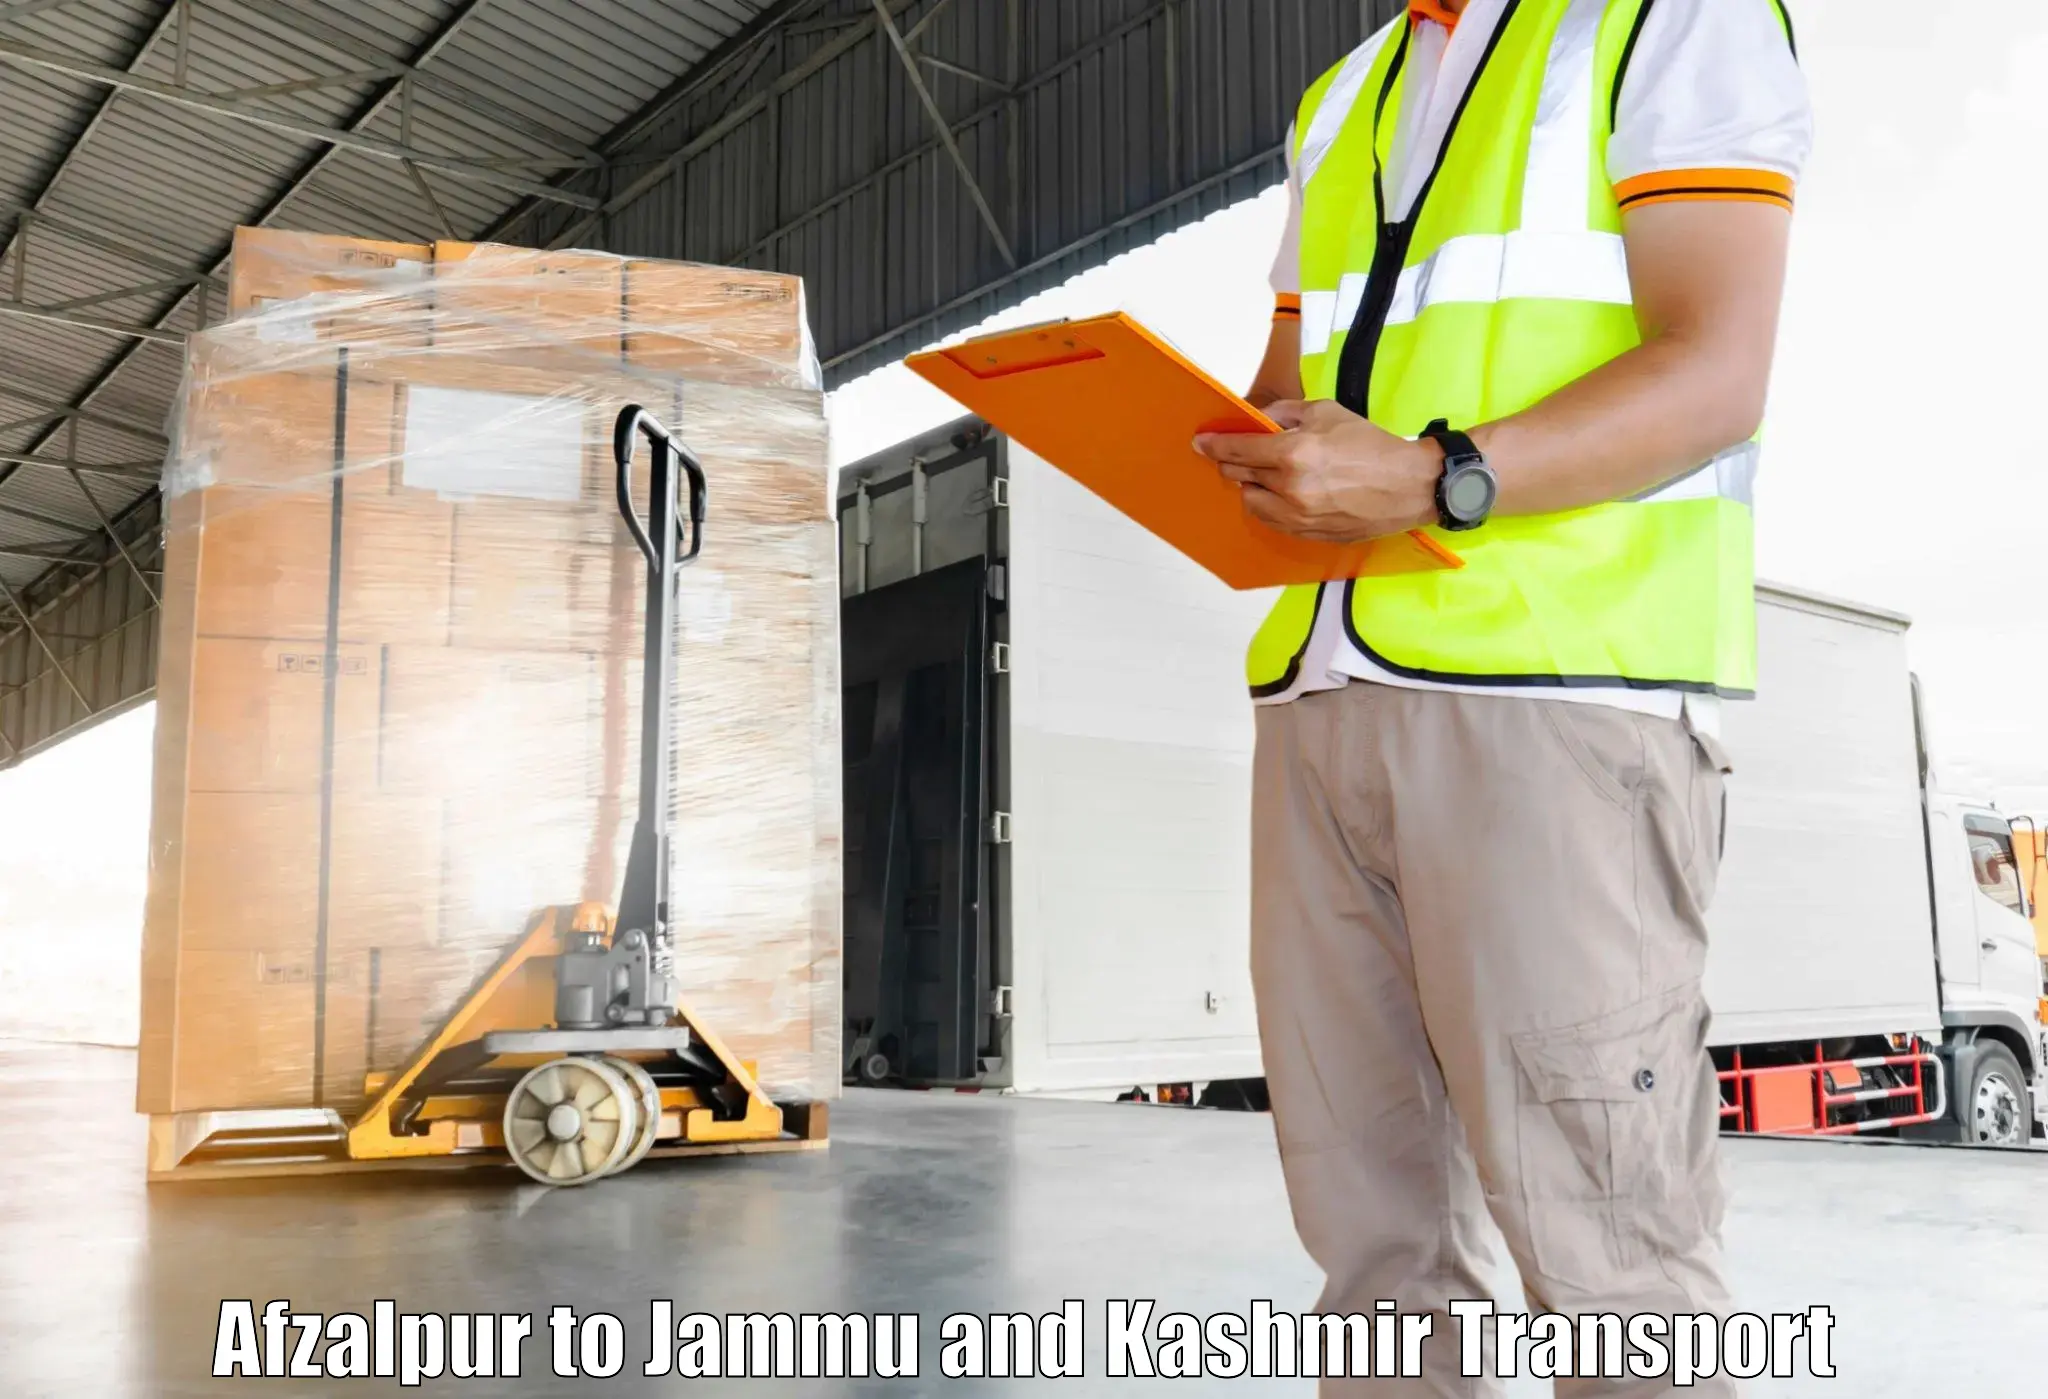 Container transport service Afzalpur to Jammu and Kashmir